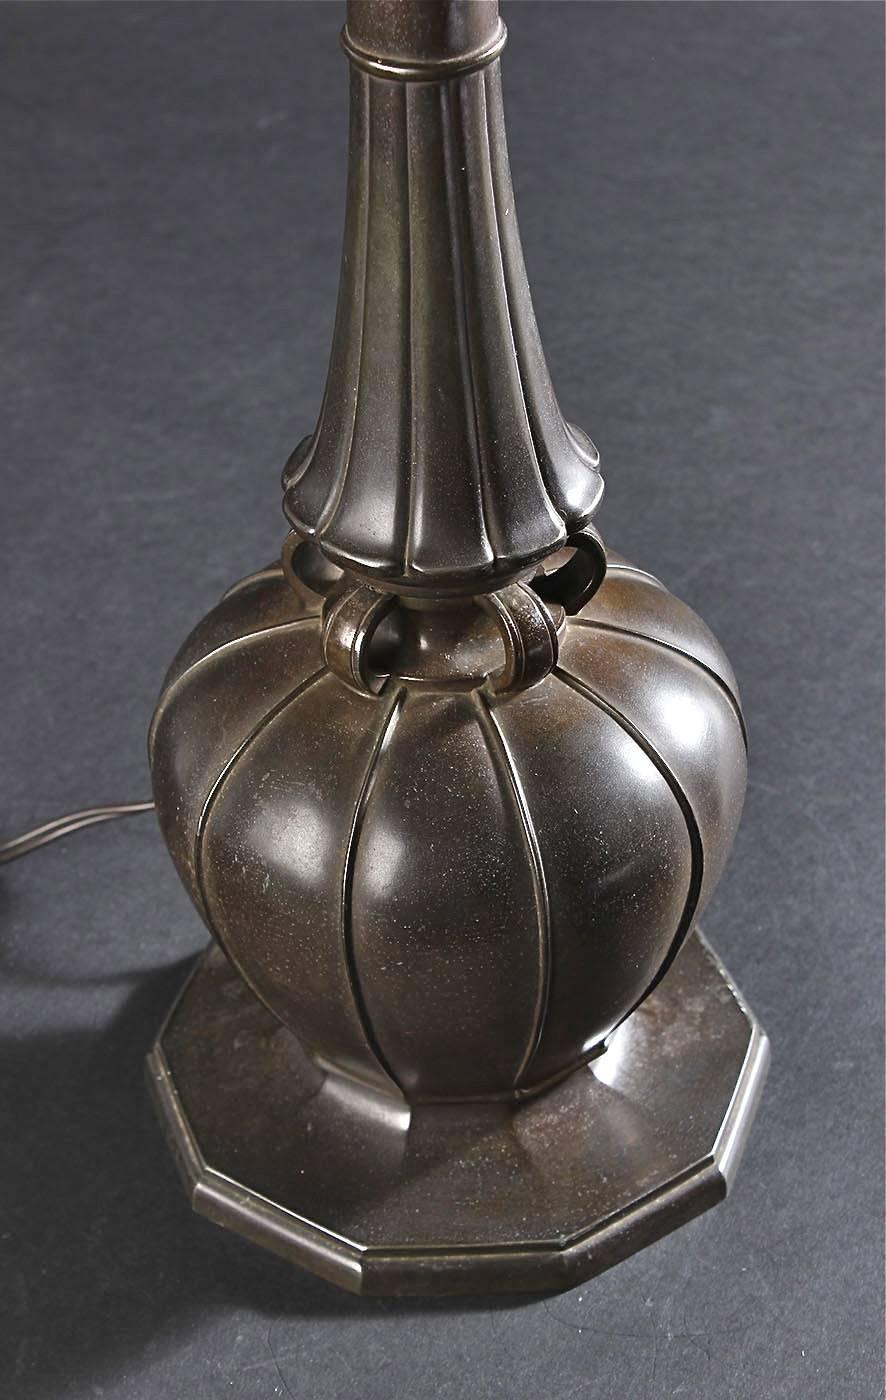 A large table lamp by Just Andersen, Denmark, circa 1930.
Patinated disco metal, marked: Just Denmark 2239.
Existing European wiring, rewiring available upon request.
The metal base height is 14